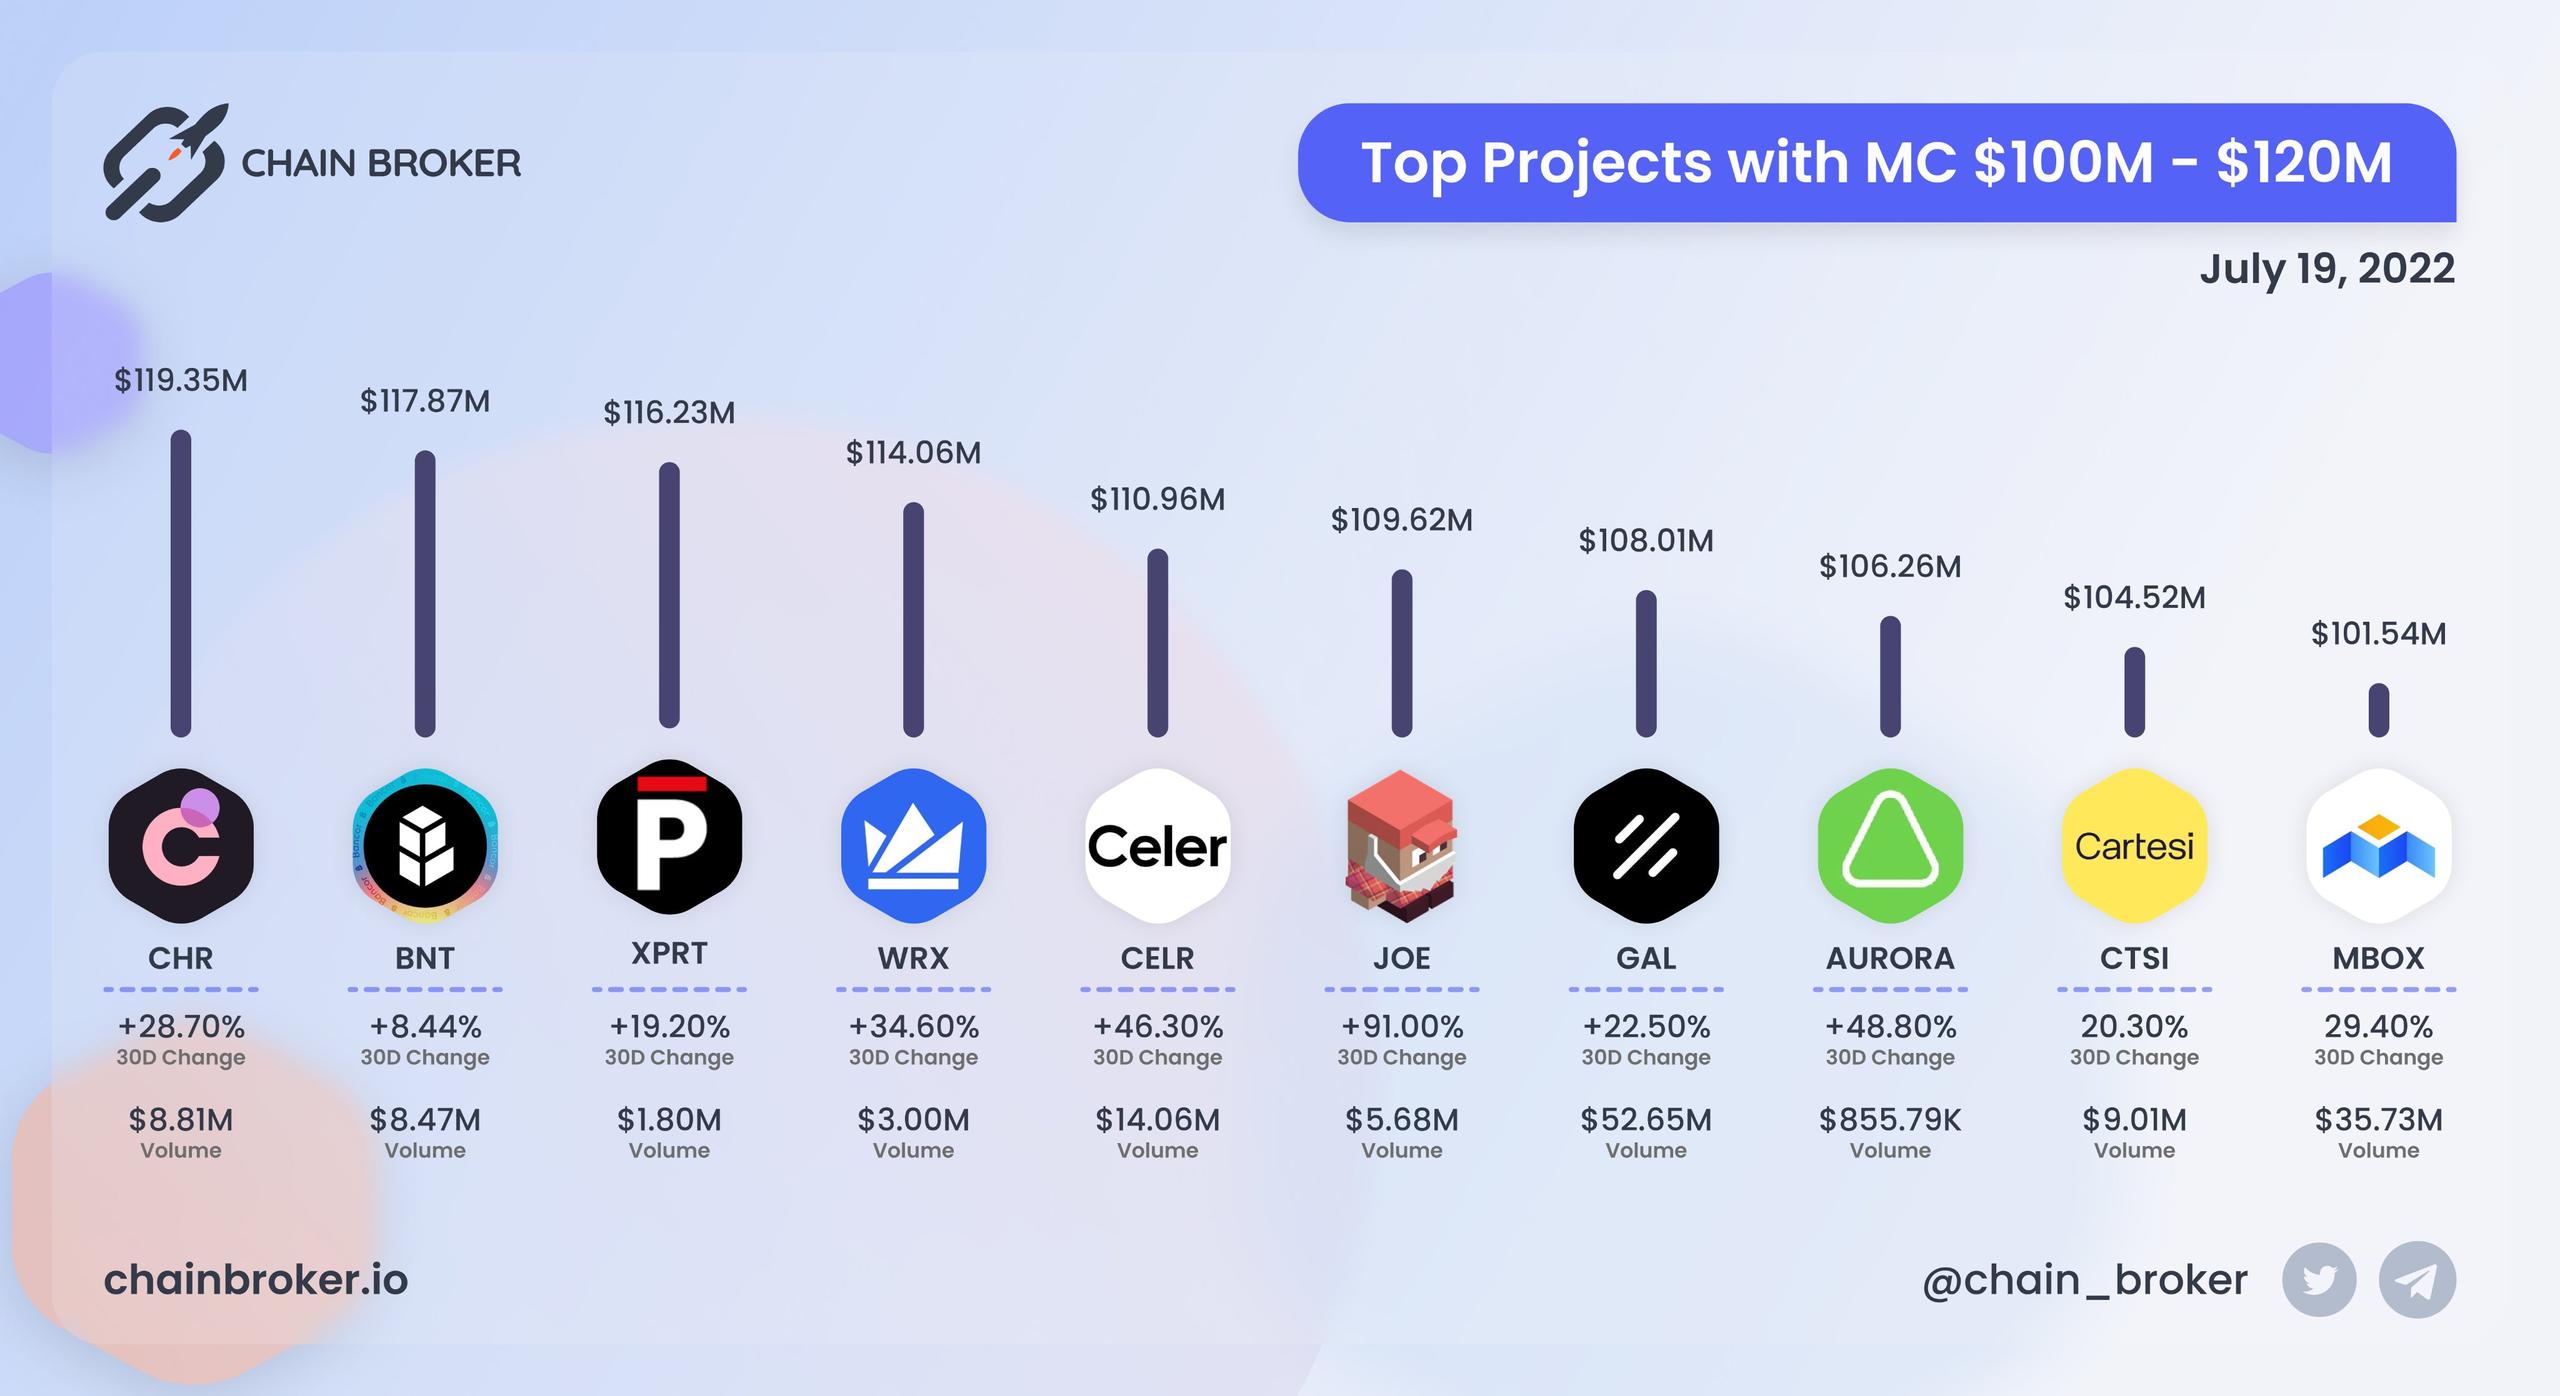 Top projects with Market Cap $100M - $120M